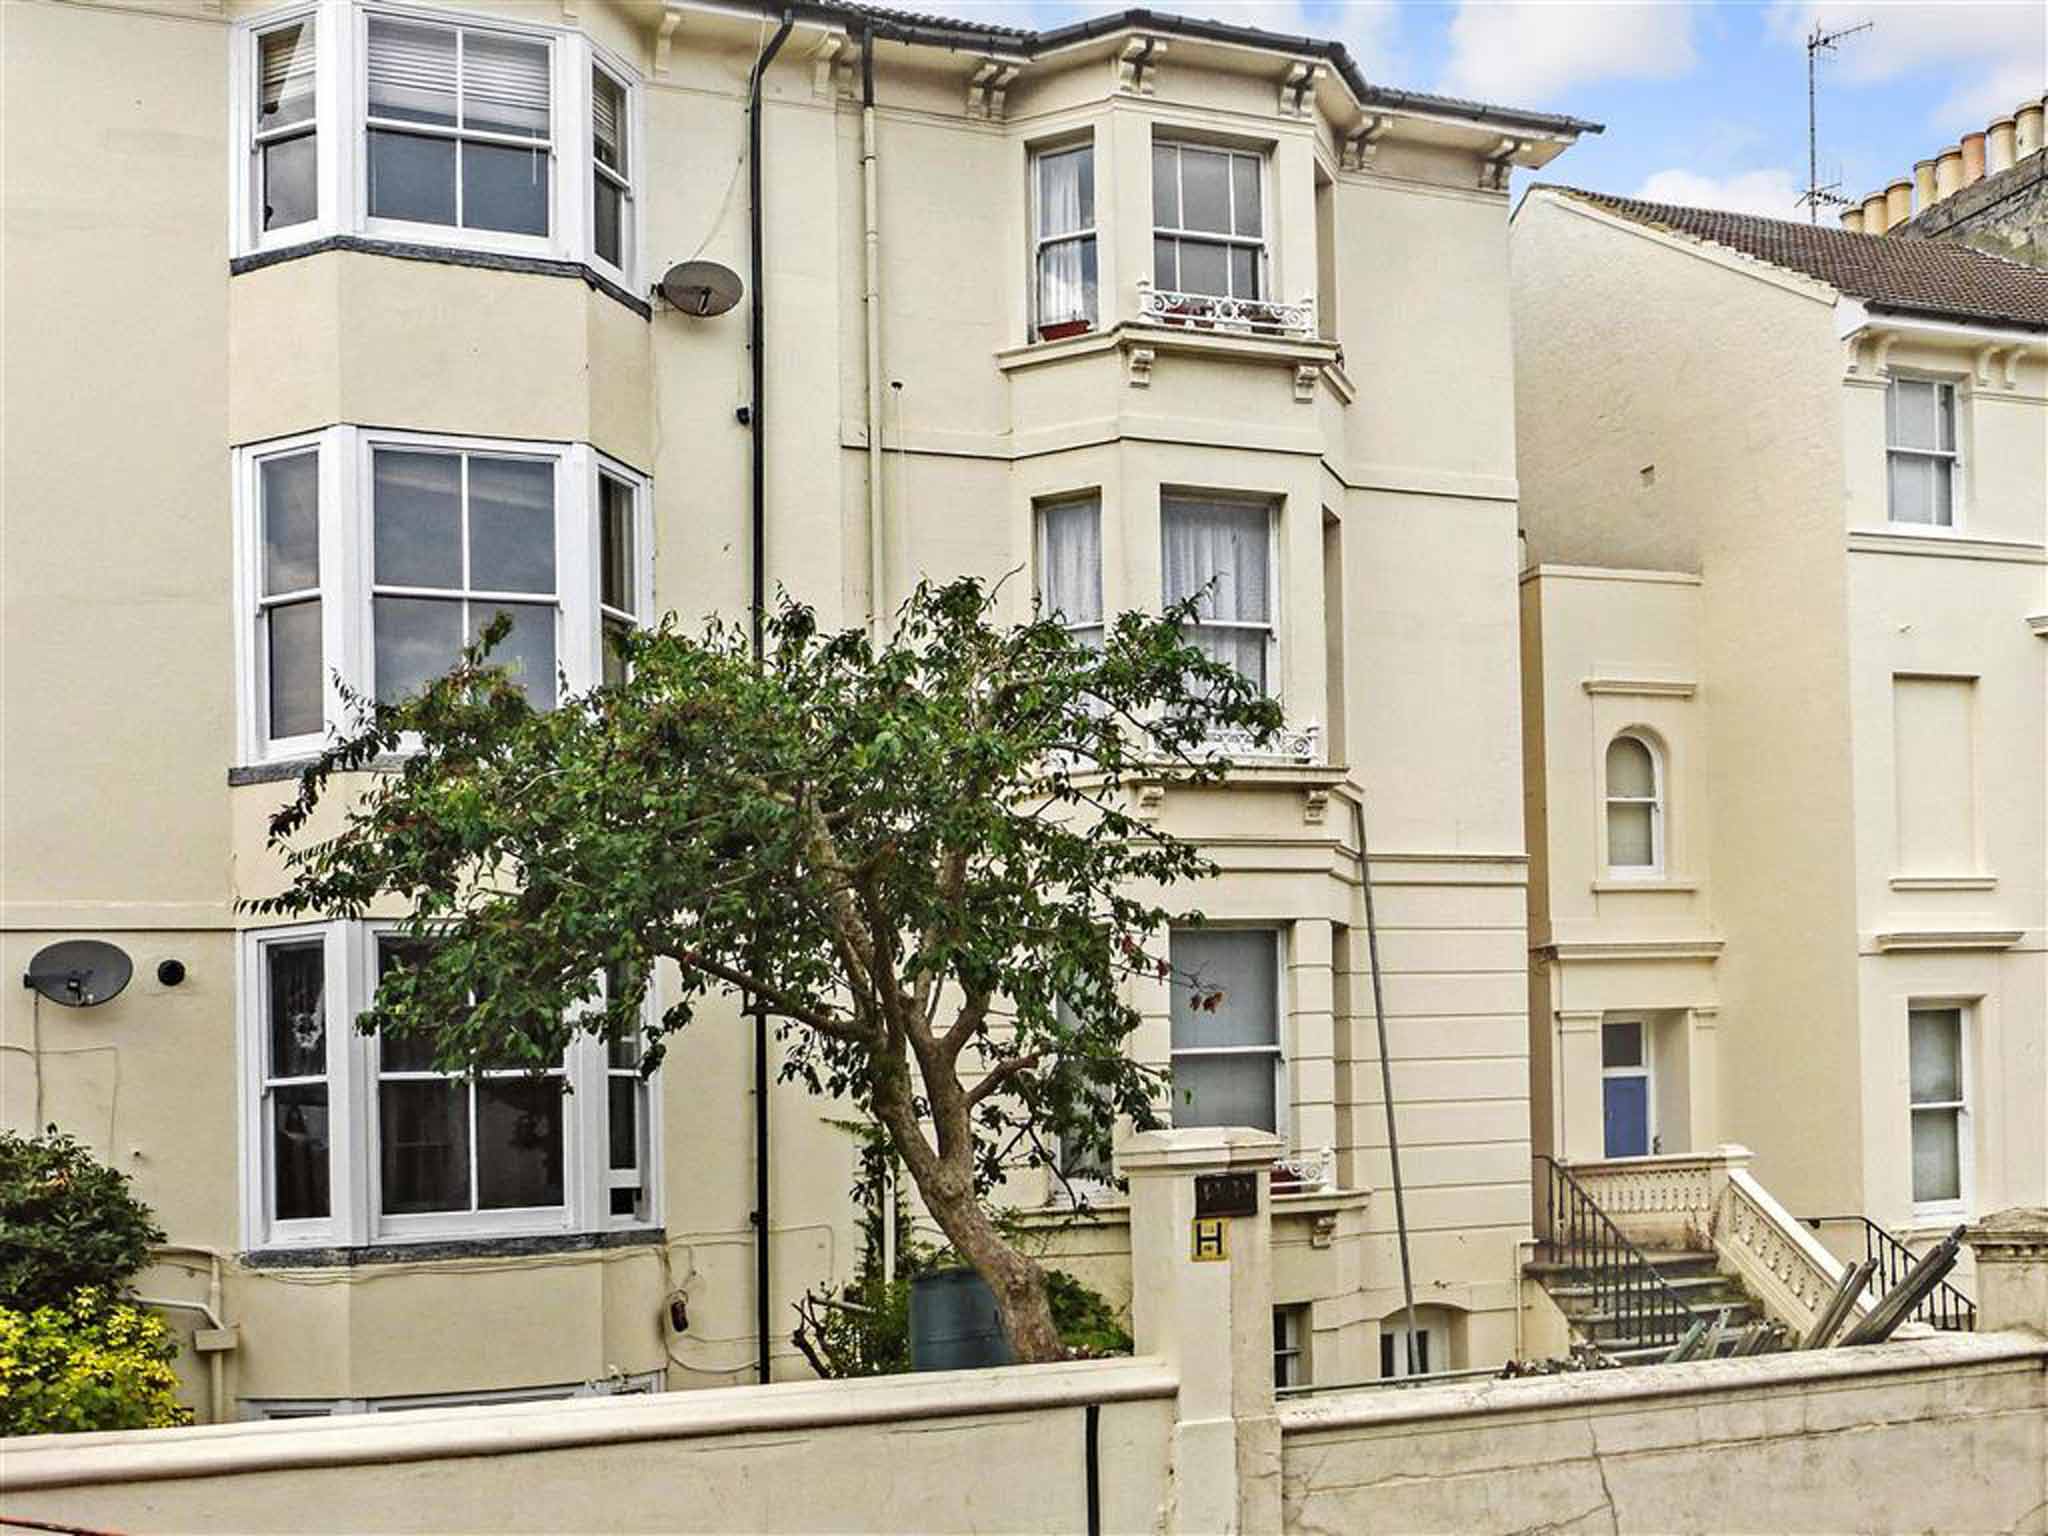 Two bedroom flat for sale, Chatham Place, Brighton, East Sussex BN1. On with Cubitt and West for £200,000